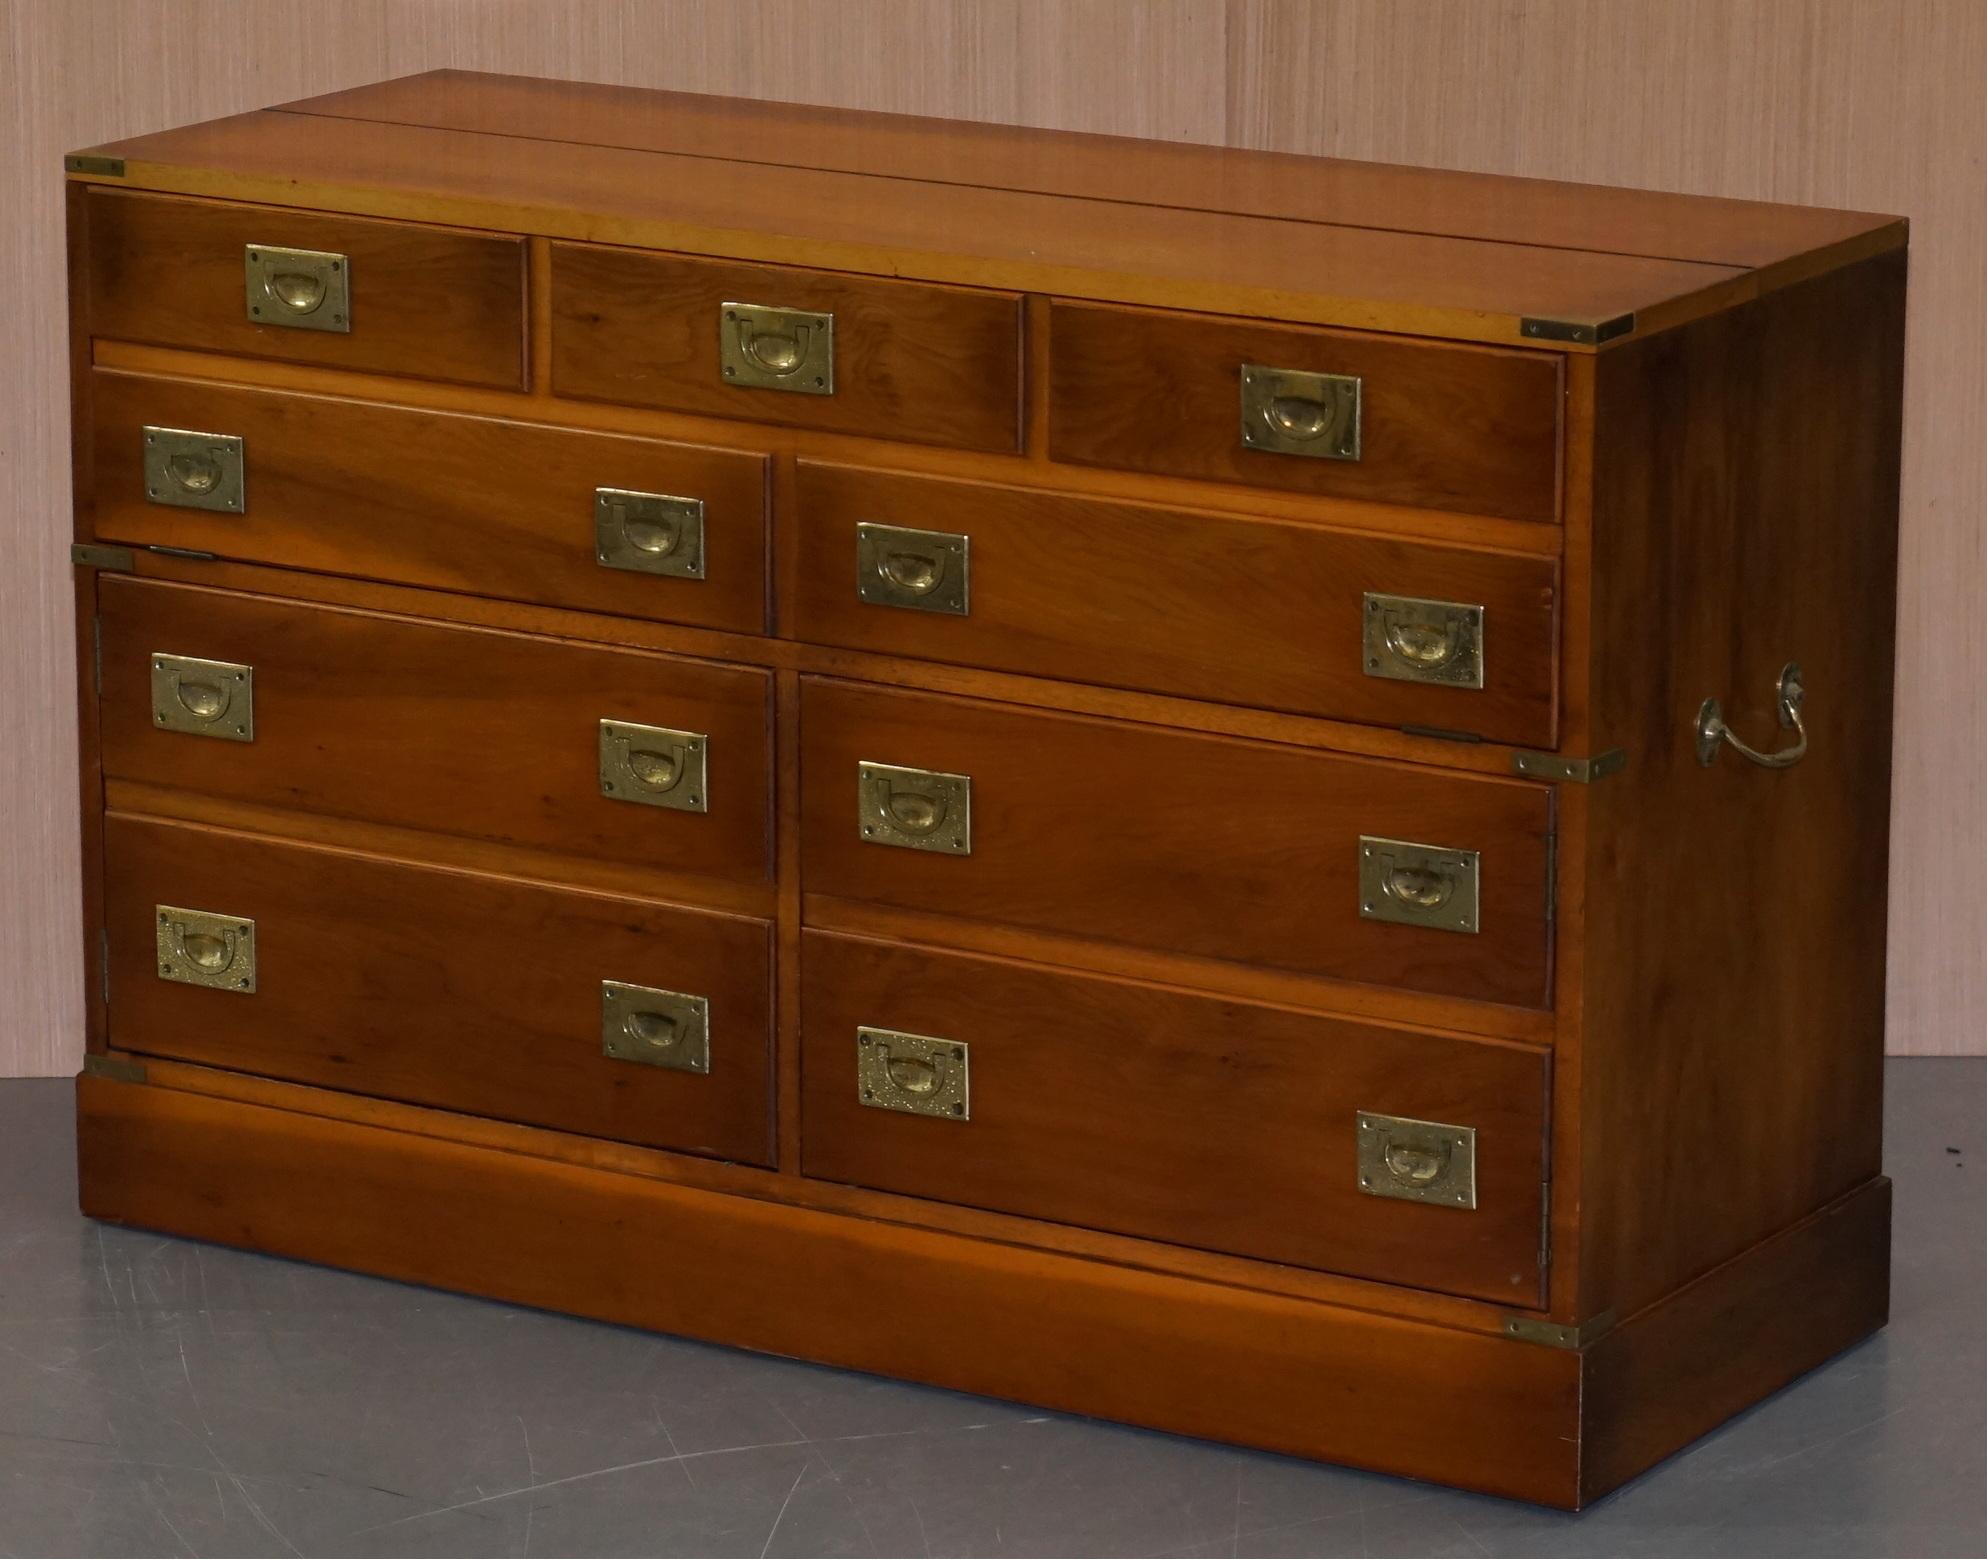 English Record Player Cabinet Hidden Inside Military Campaign Chest of Drawers